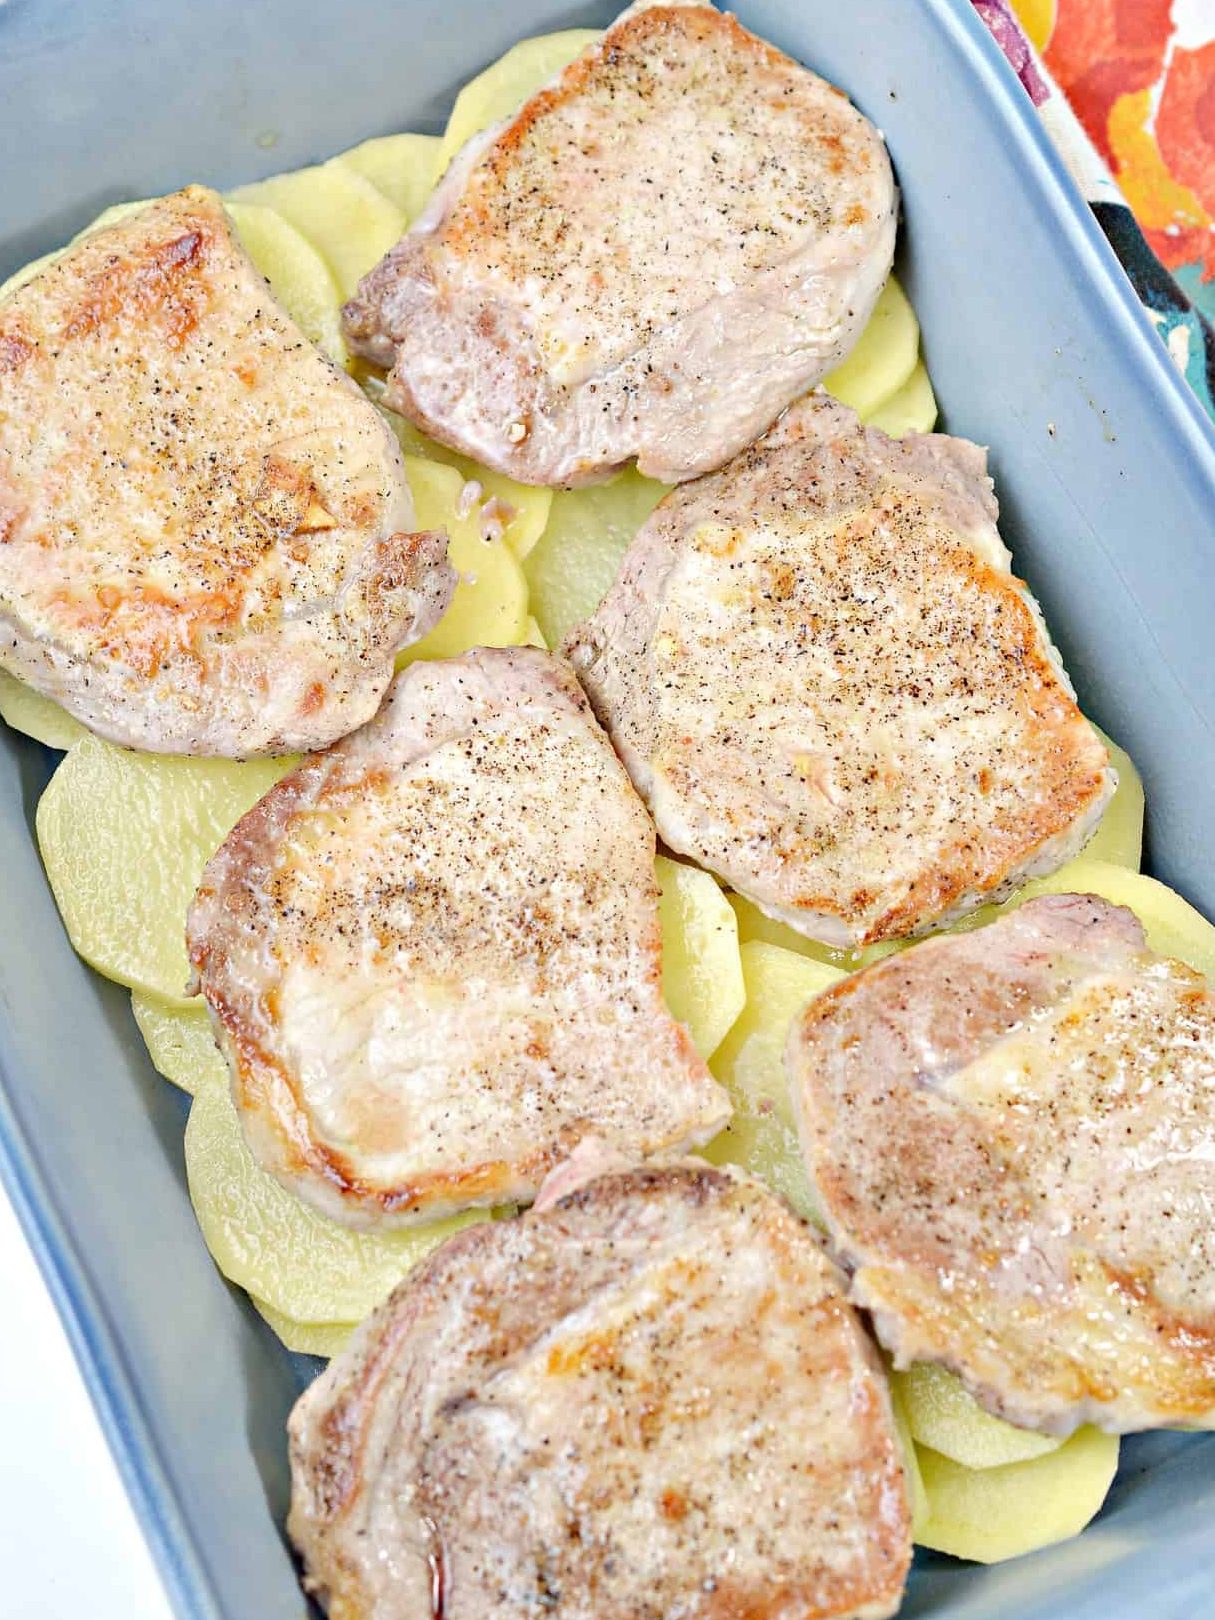 Place the browned pork chops on top of the potatoes.